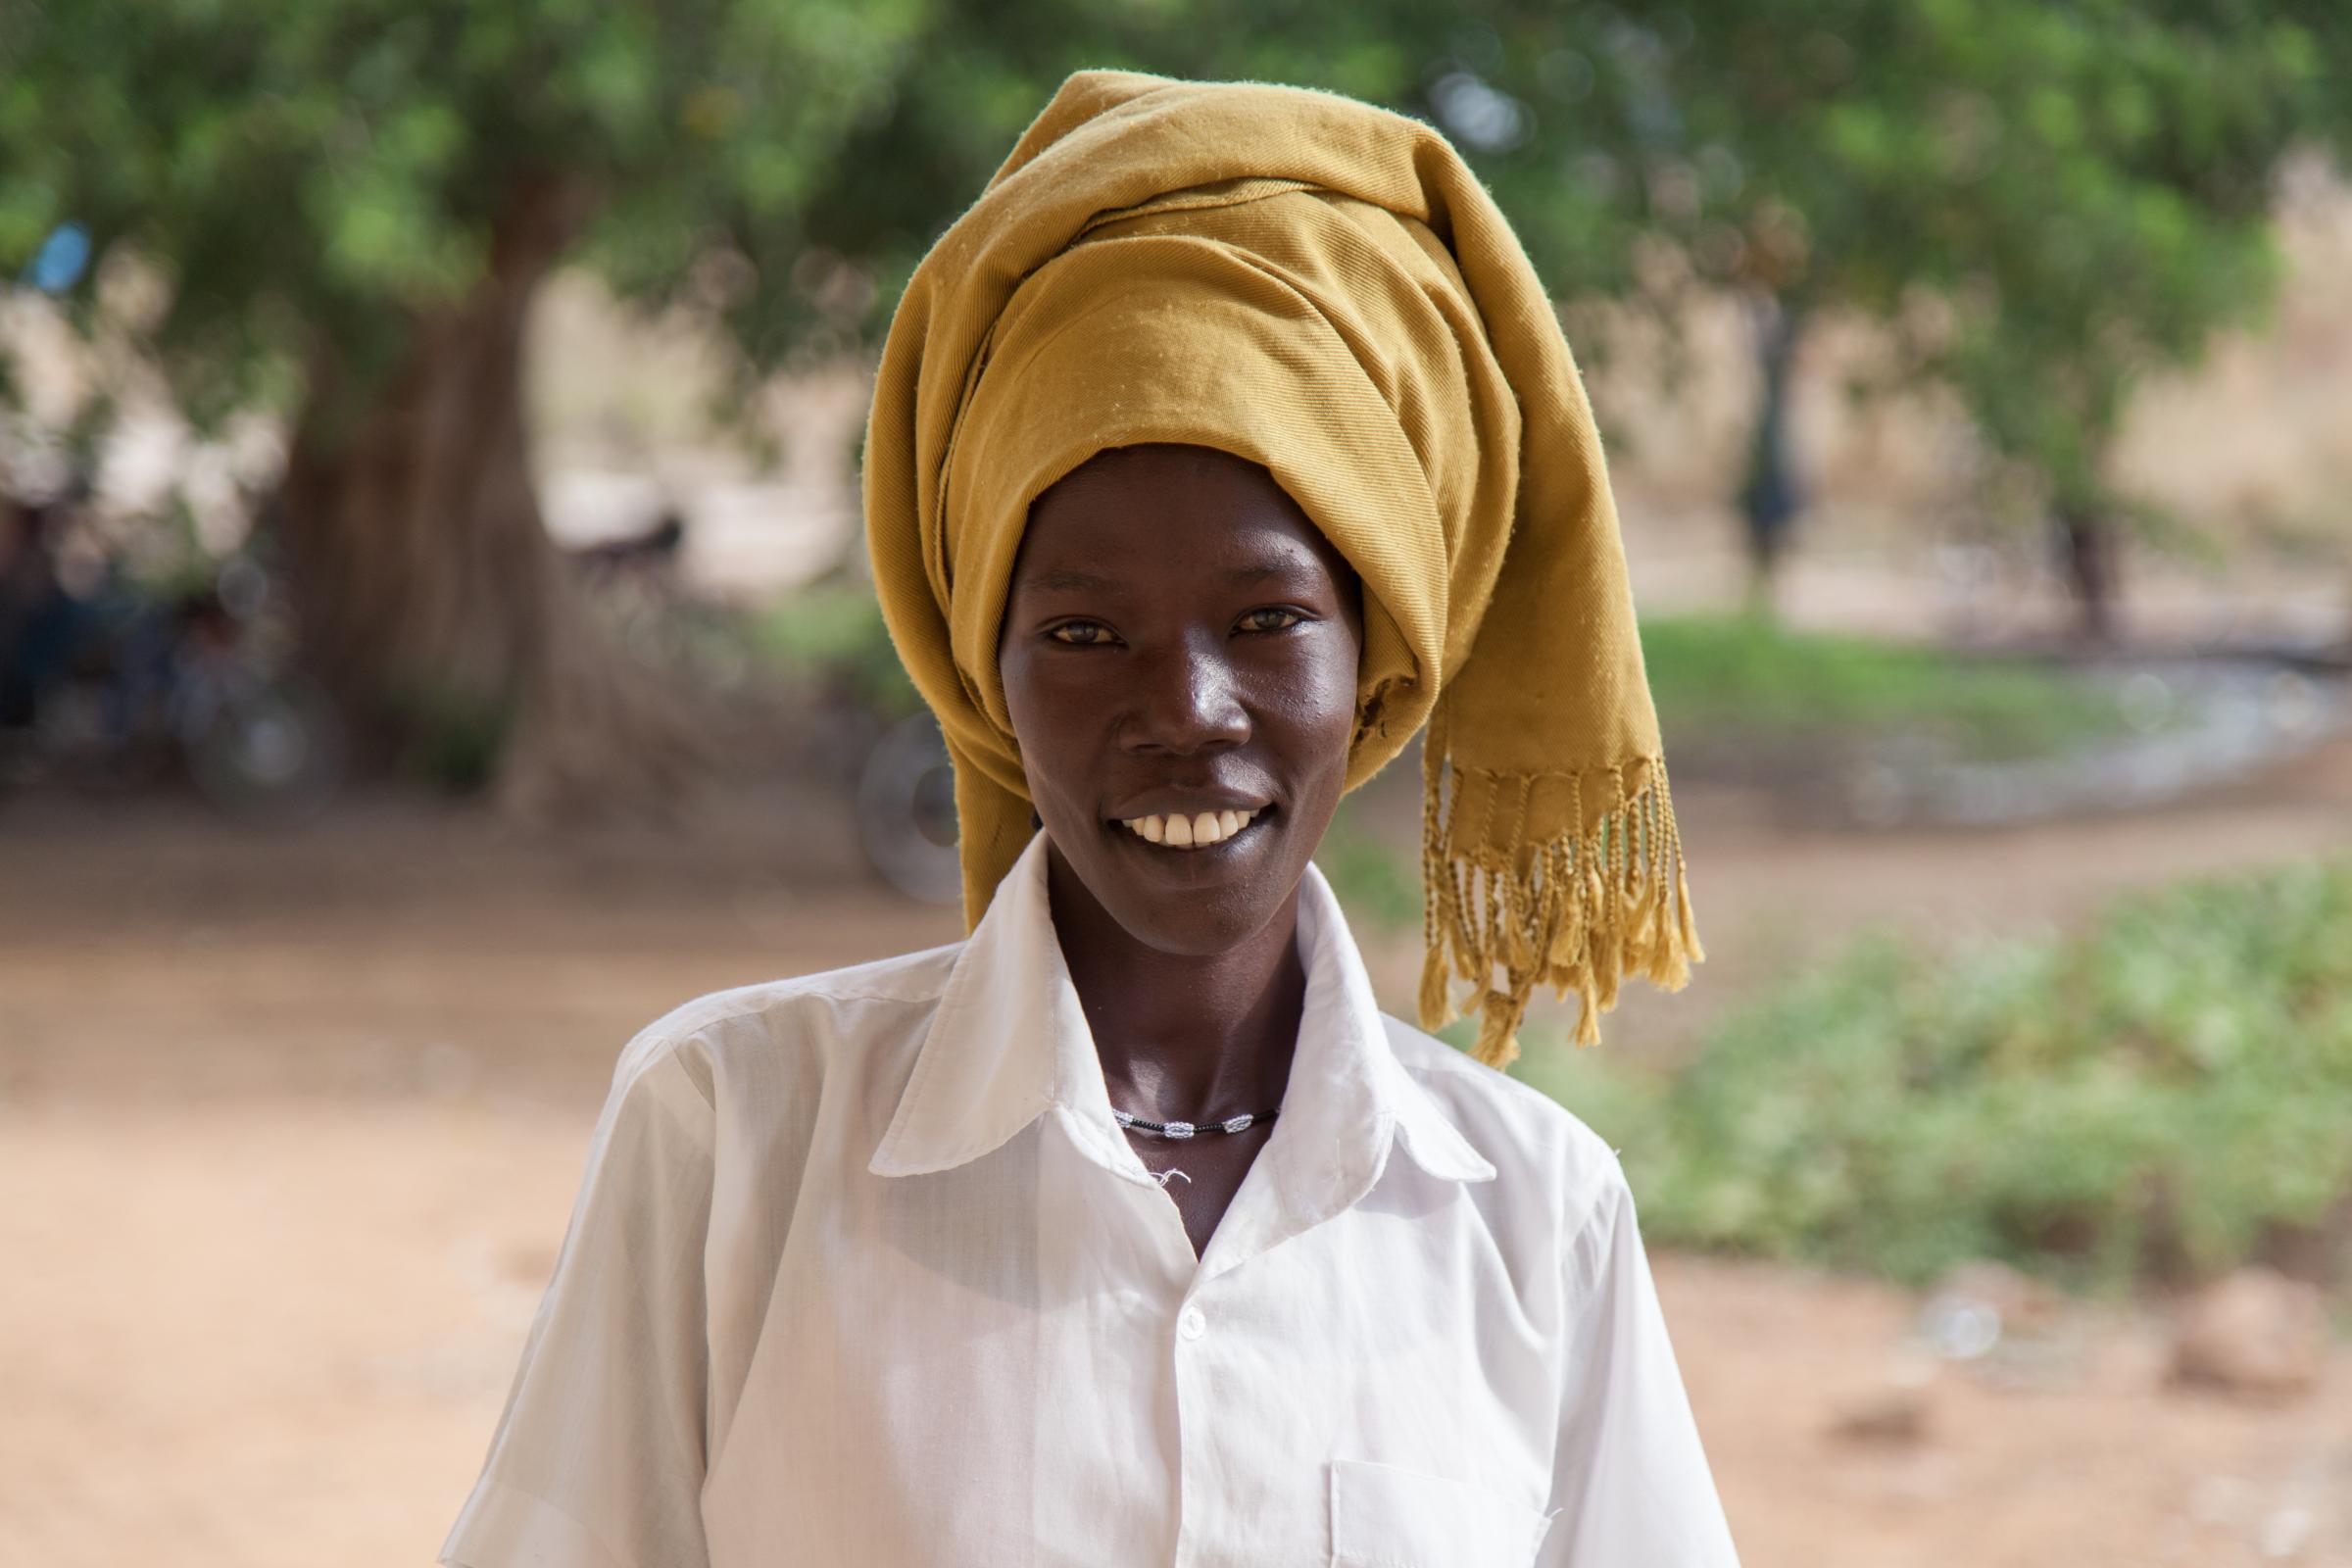 REINING IN THE NEXT GENERATION OF HEALTH PROFESSIONALS  - Elizabeth Nyibol Akot, 24 years old from Aweil is a midwifery student at the Aweil Health...